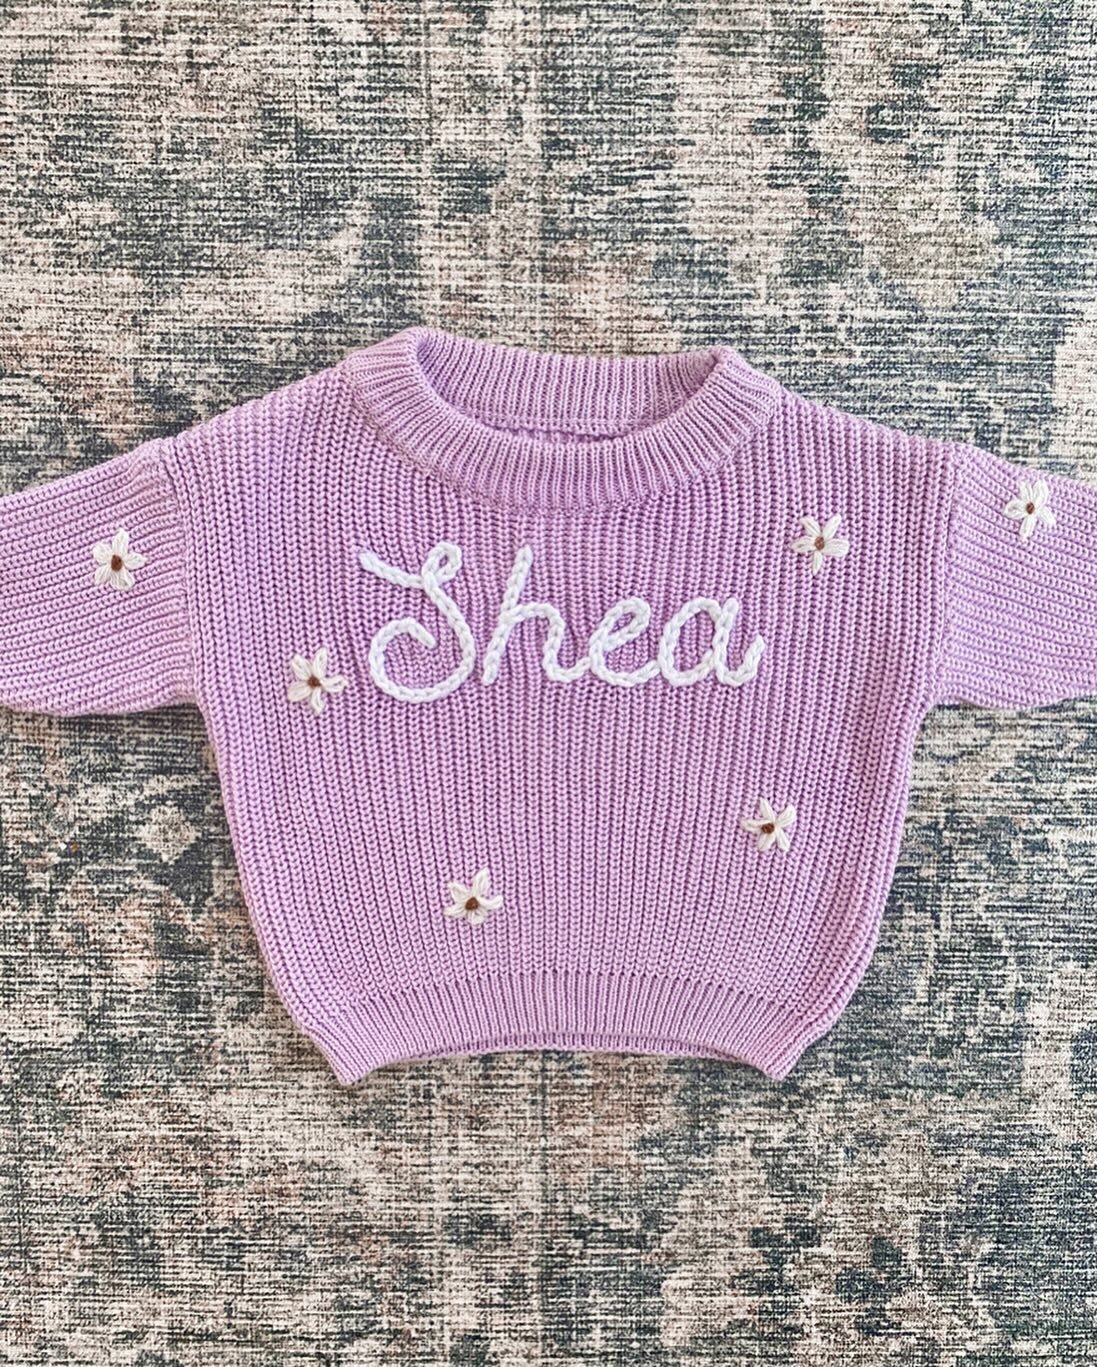 Spring has sprung and we&rsquo;ve got the daisies to prove it! 🌼

Welcome to the world sweet Shea! 💜